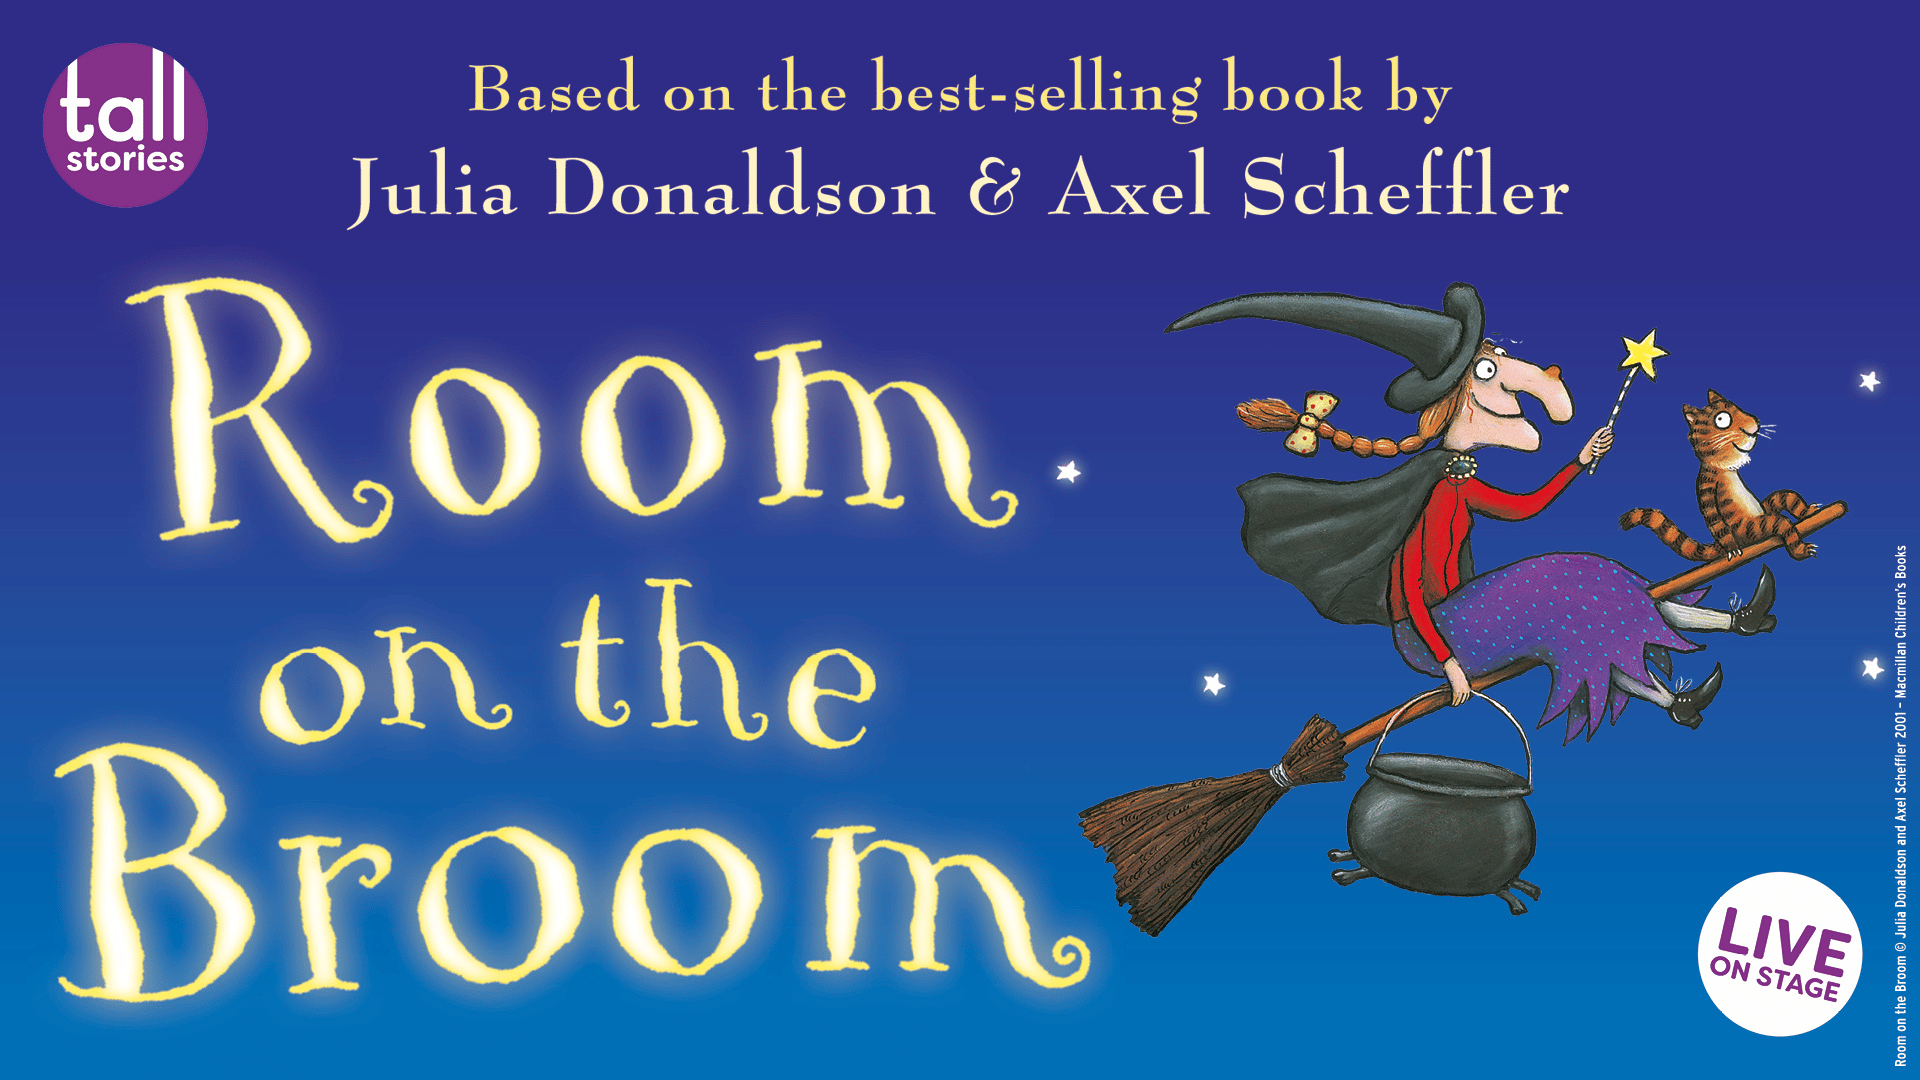 Room on the Broom - the original book's artwork with a witch flying her broomstick